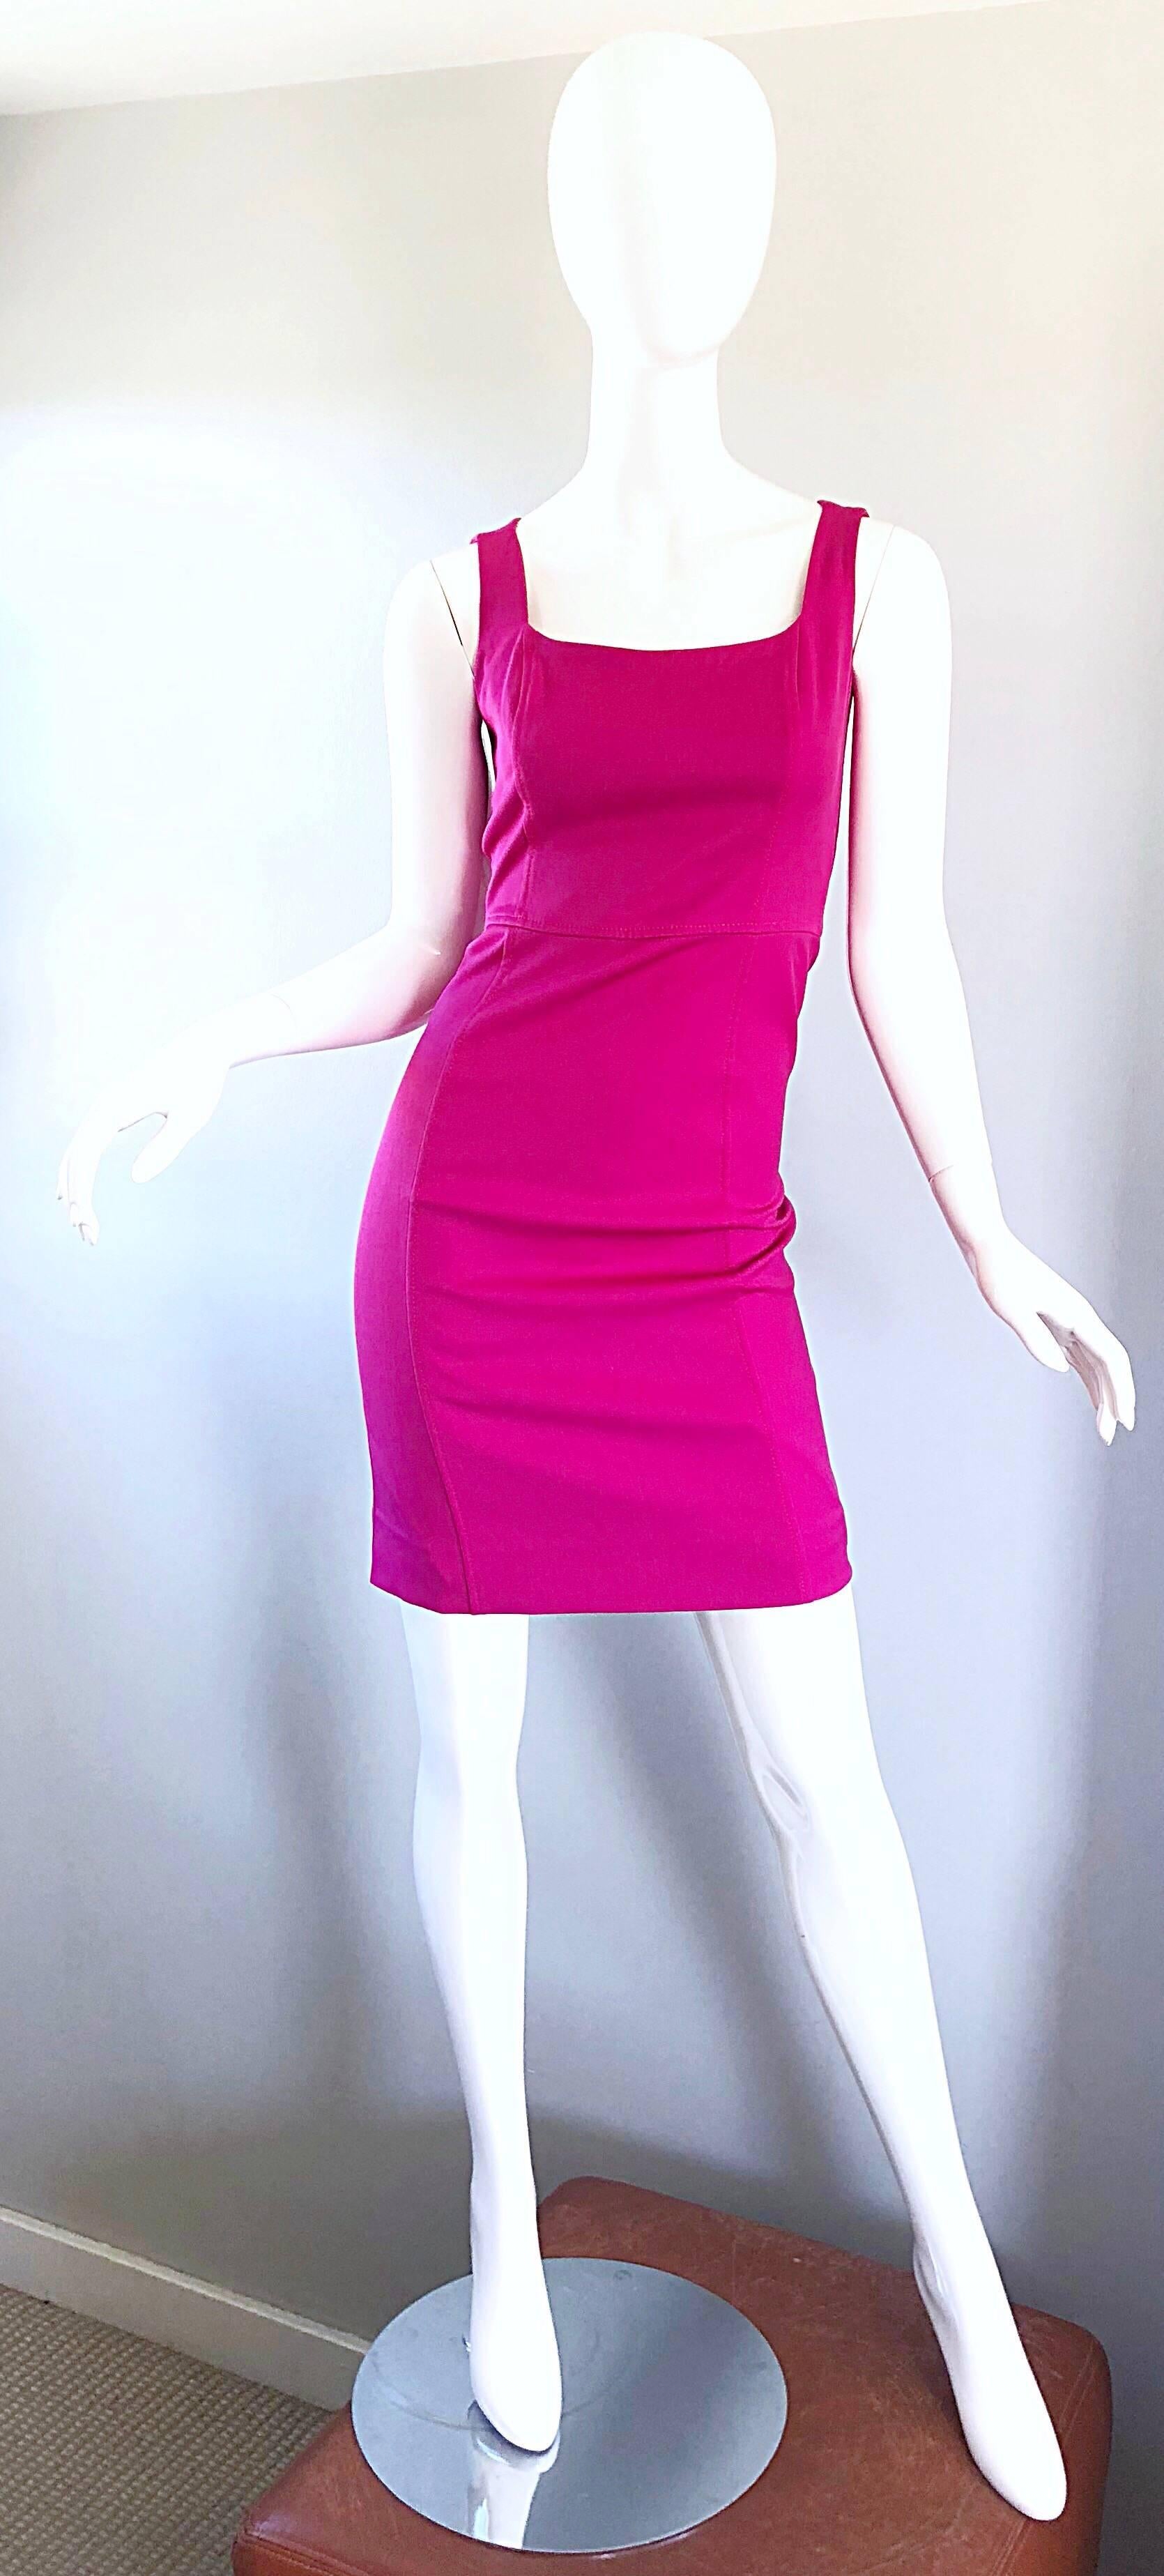 Chic 1990s GIROGIO ARMANI COLLEZIONI shocking hot pink bodycon rayon stretch dress! Features a classic flattering silhouette that really shows off the body, and is great at hiding any 'problem' areas! Fully lined. Hidden zipper up the back with